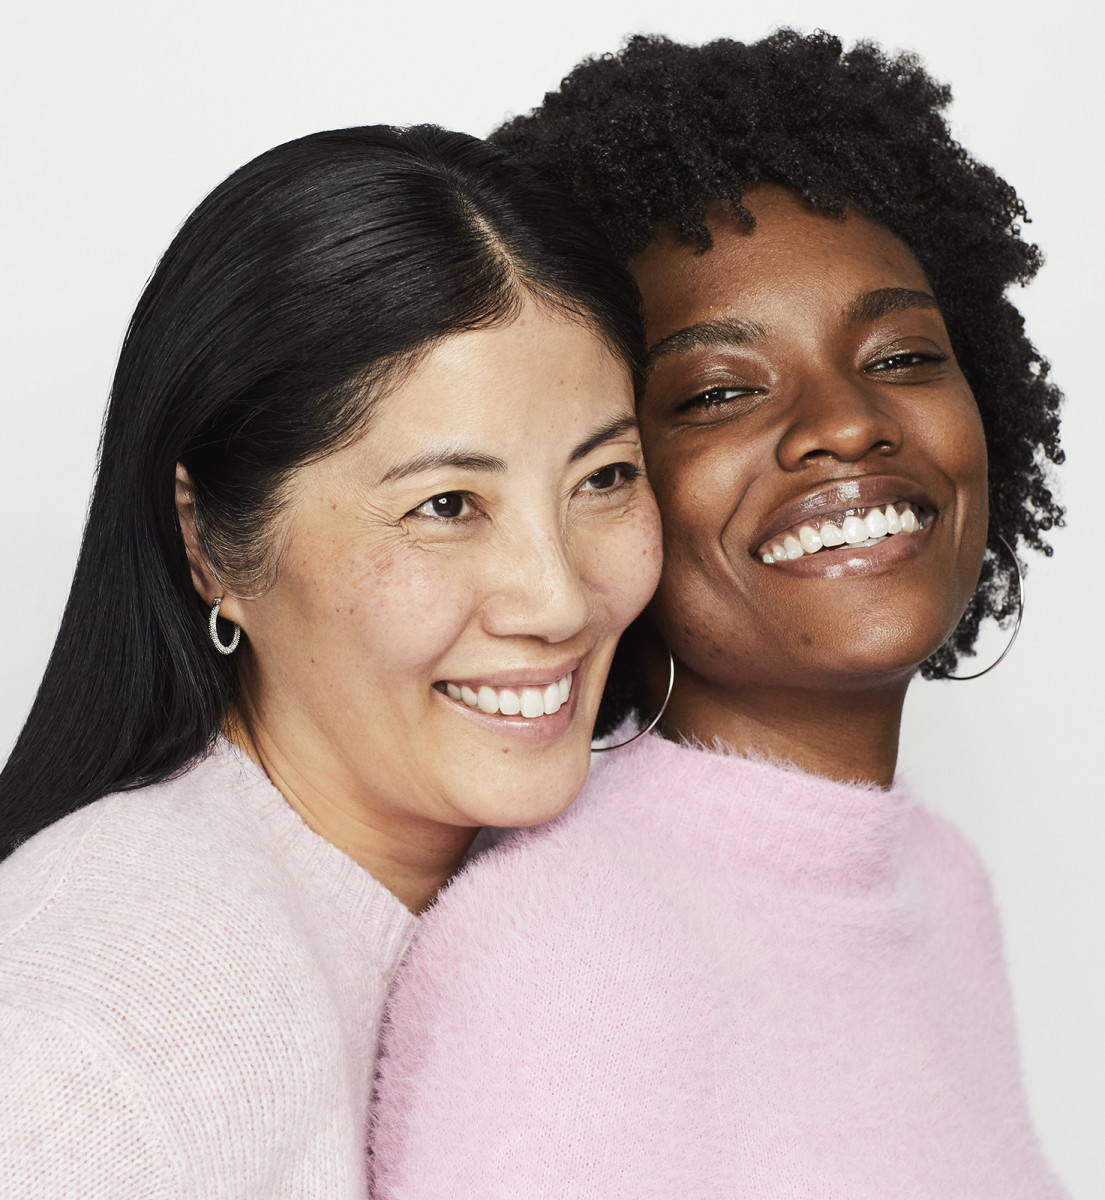 Models Sabrina and Zanana sans foundation or retouching in a Shopper's Drug Mart Skin Celebrated campaign image from January 2020